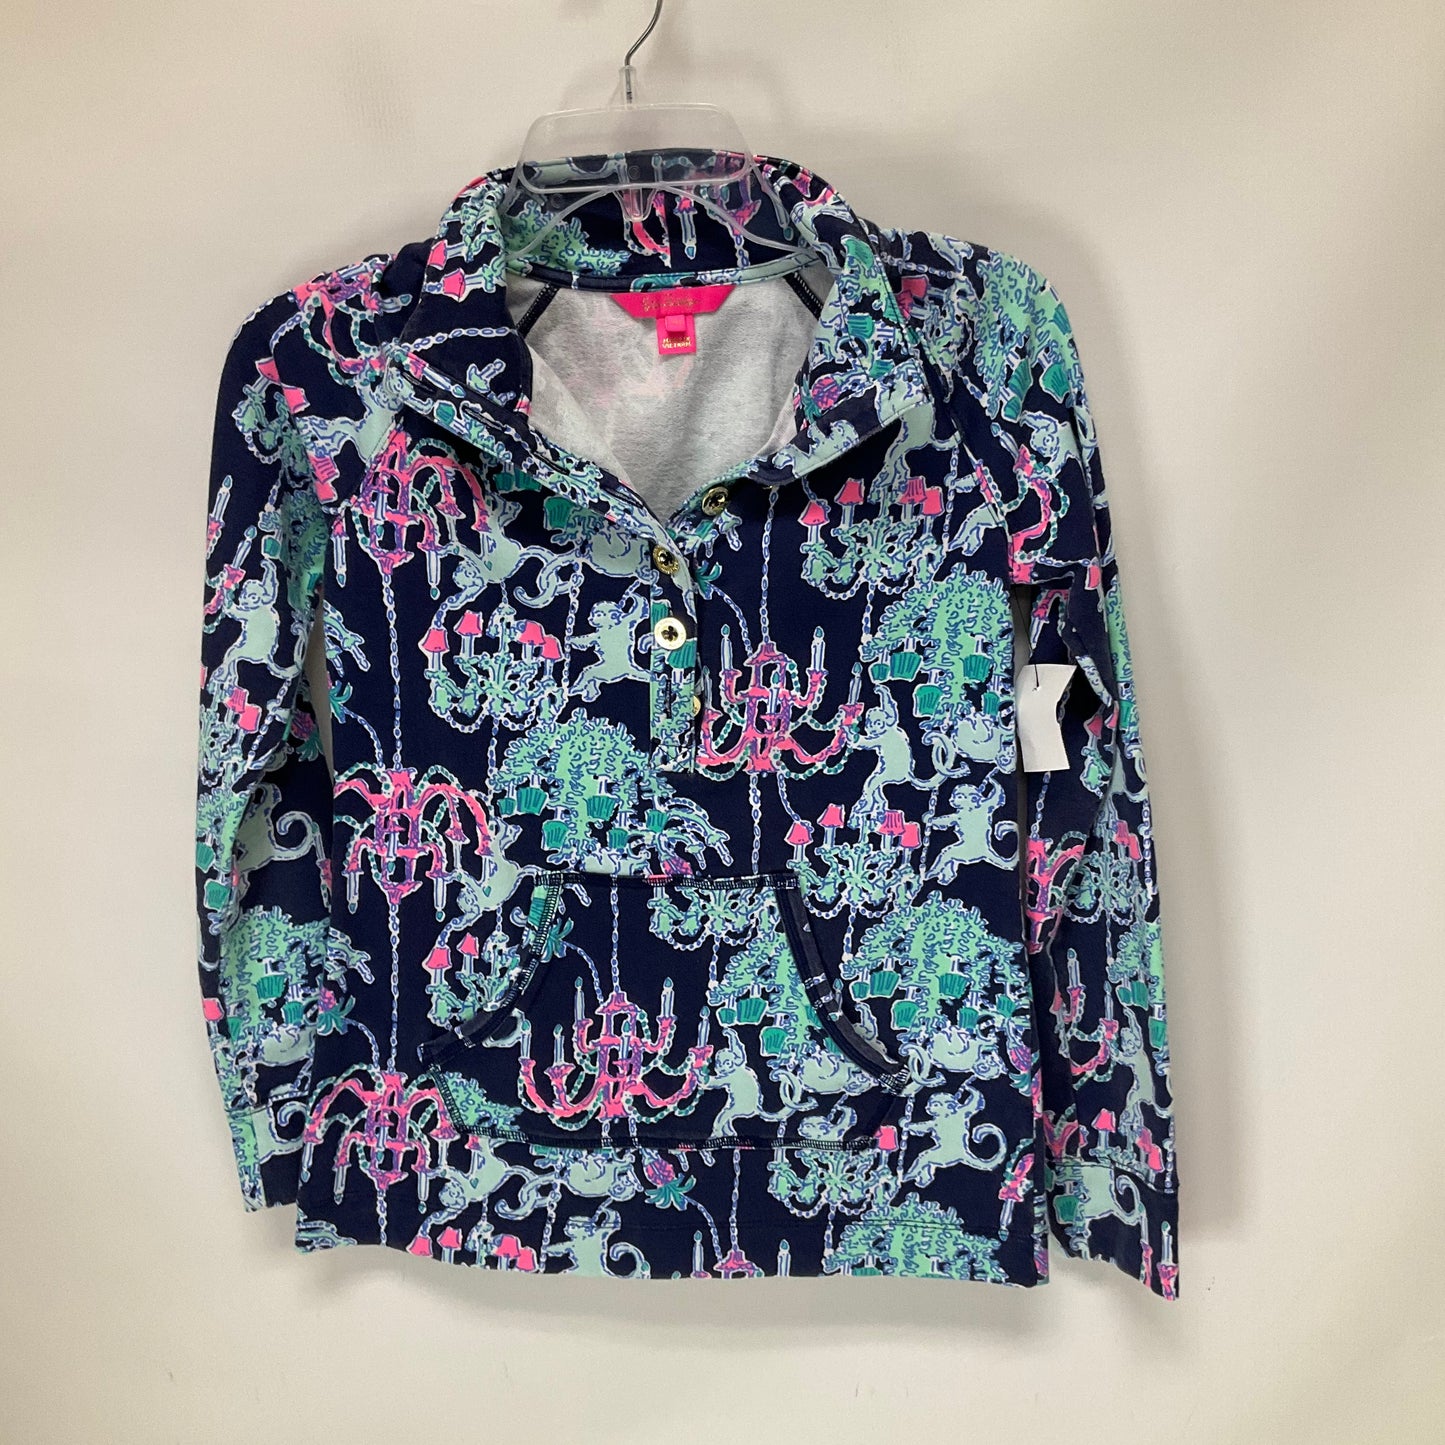 Blue Athletic Top Long Sleeve Collar Lilly Pulitzer, Size Xxs